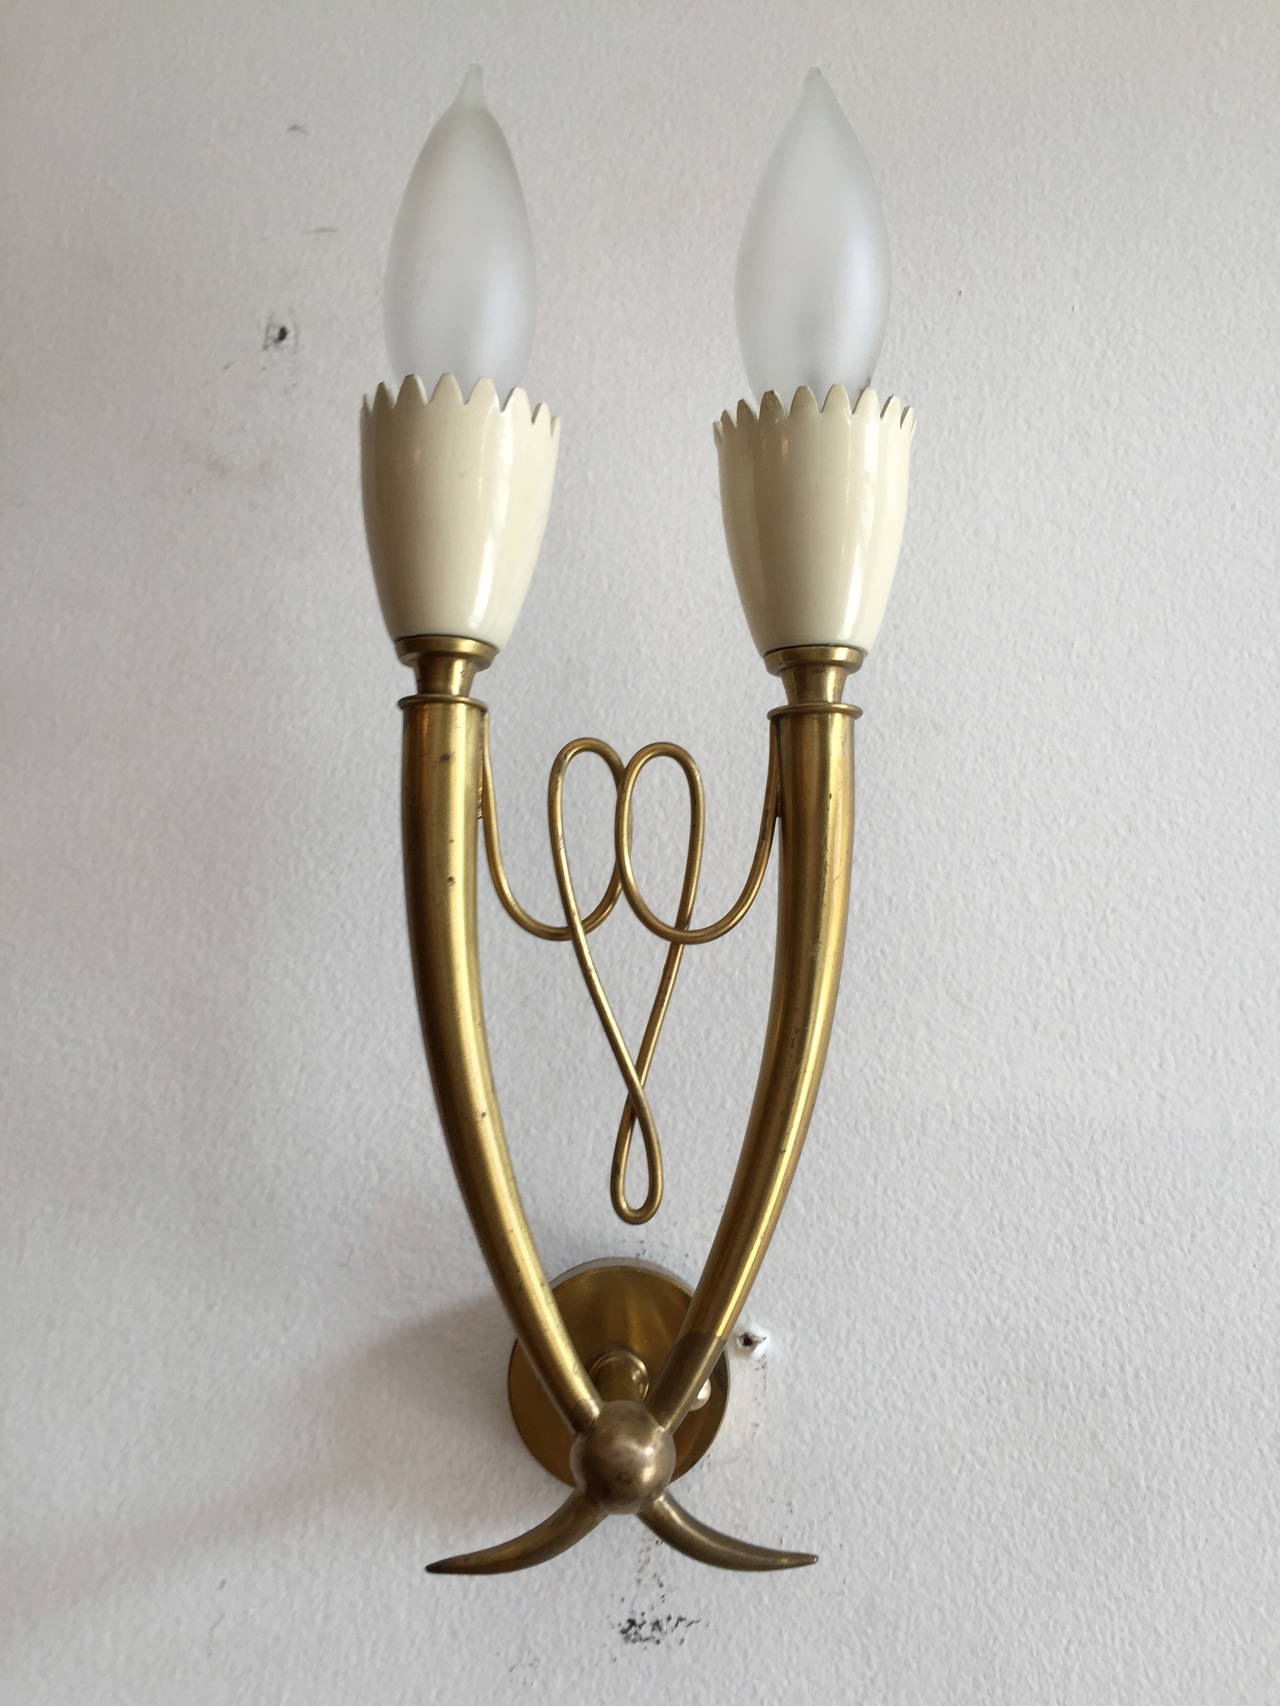 A pair of 1960s Italian Mid-Century sconces done in aged polished brass with white enamel holders. Rewired. A circular polished brass disc to cover the electrical box is provided.